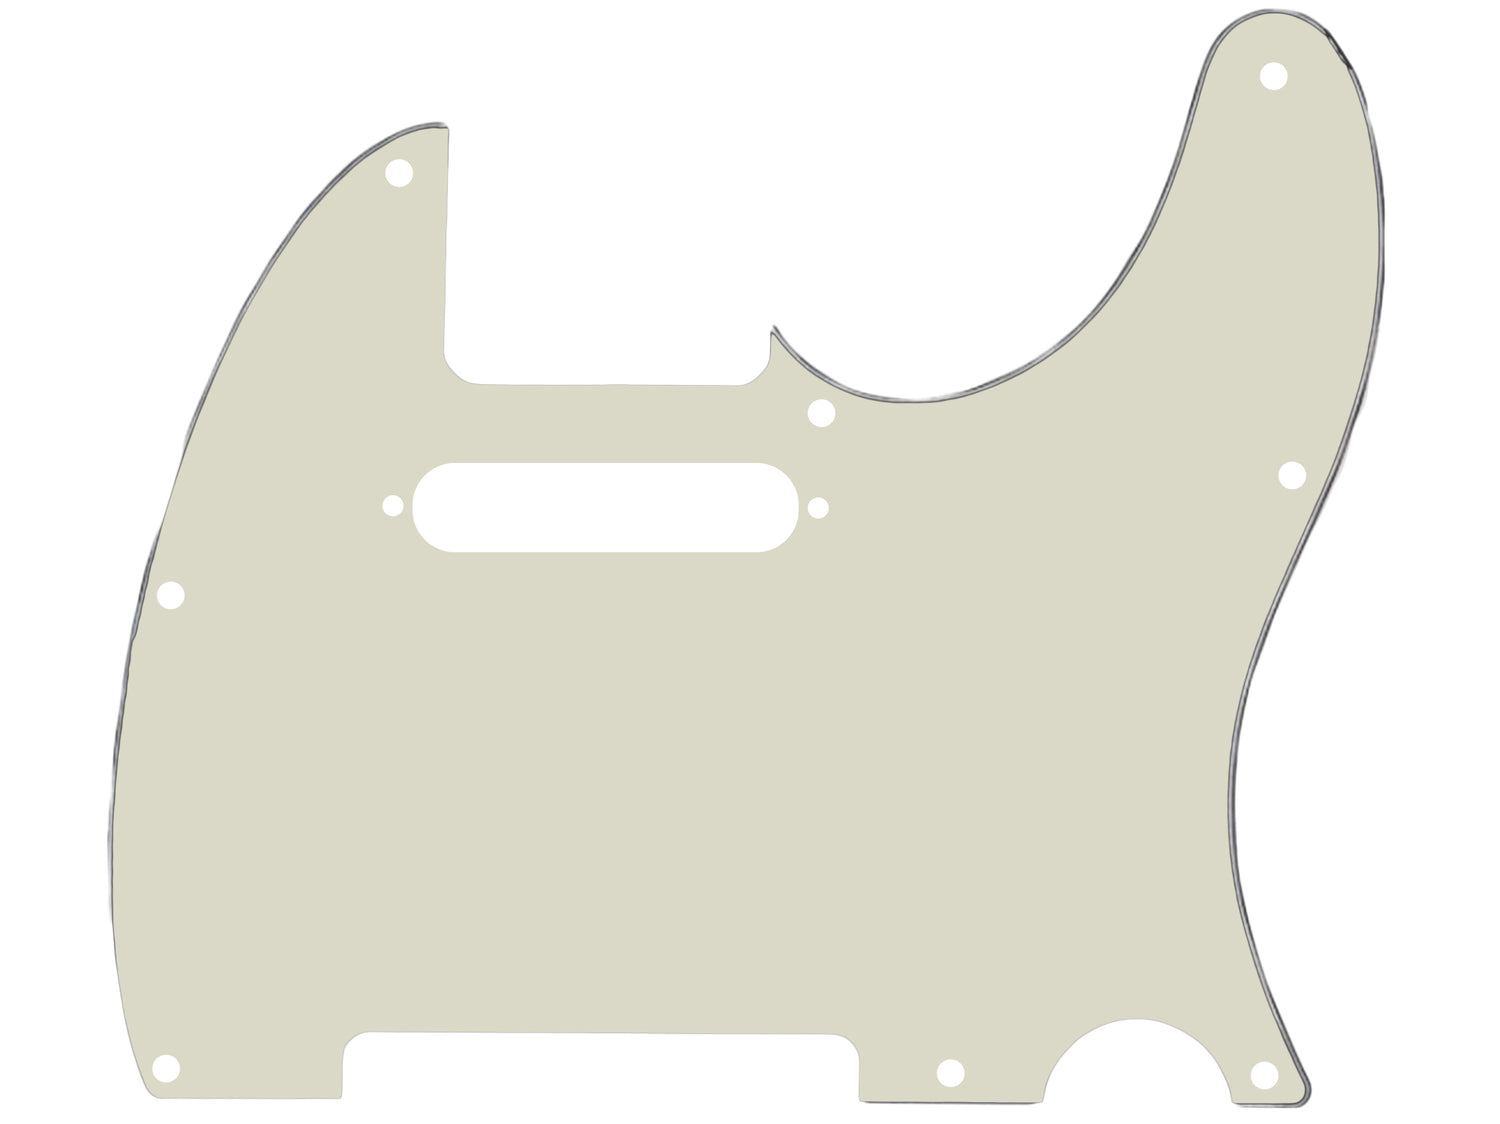 ObsidianWire telecaster pickguard 2 ply mint green